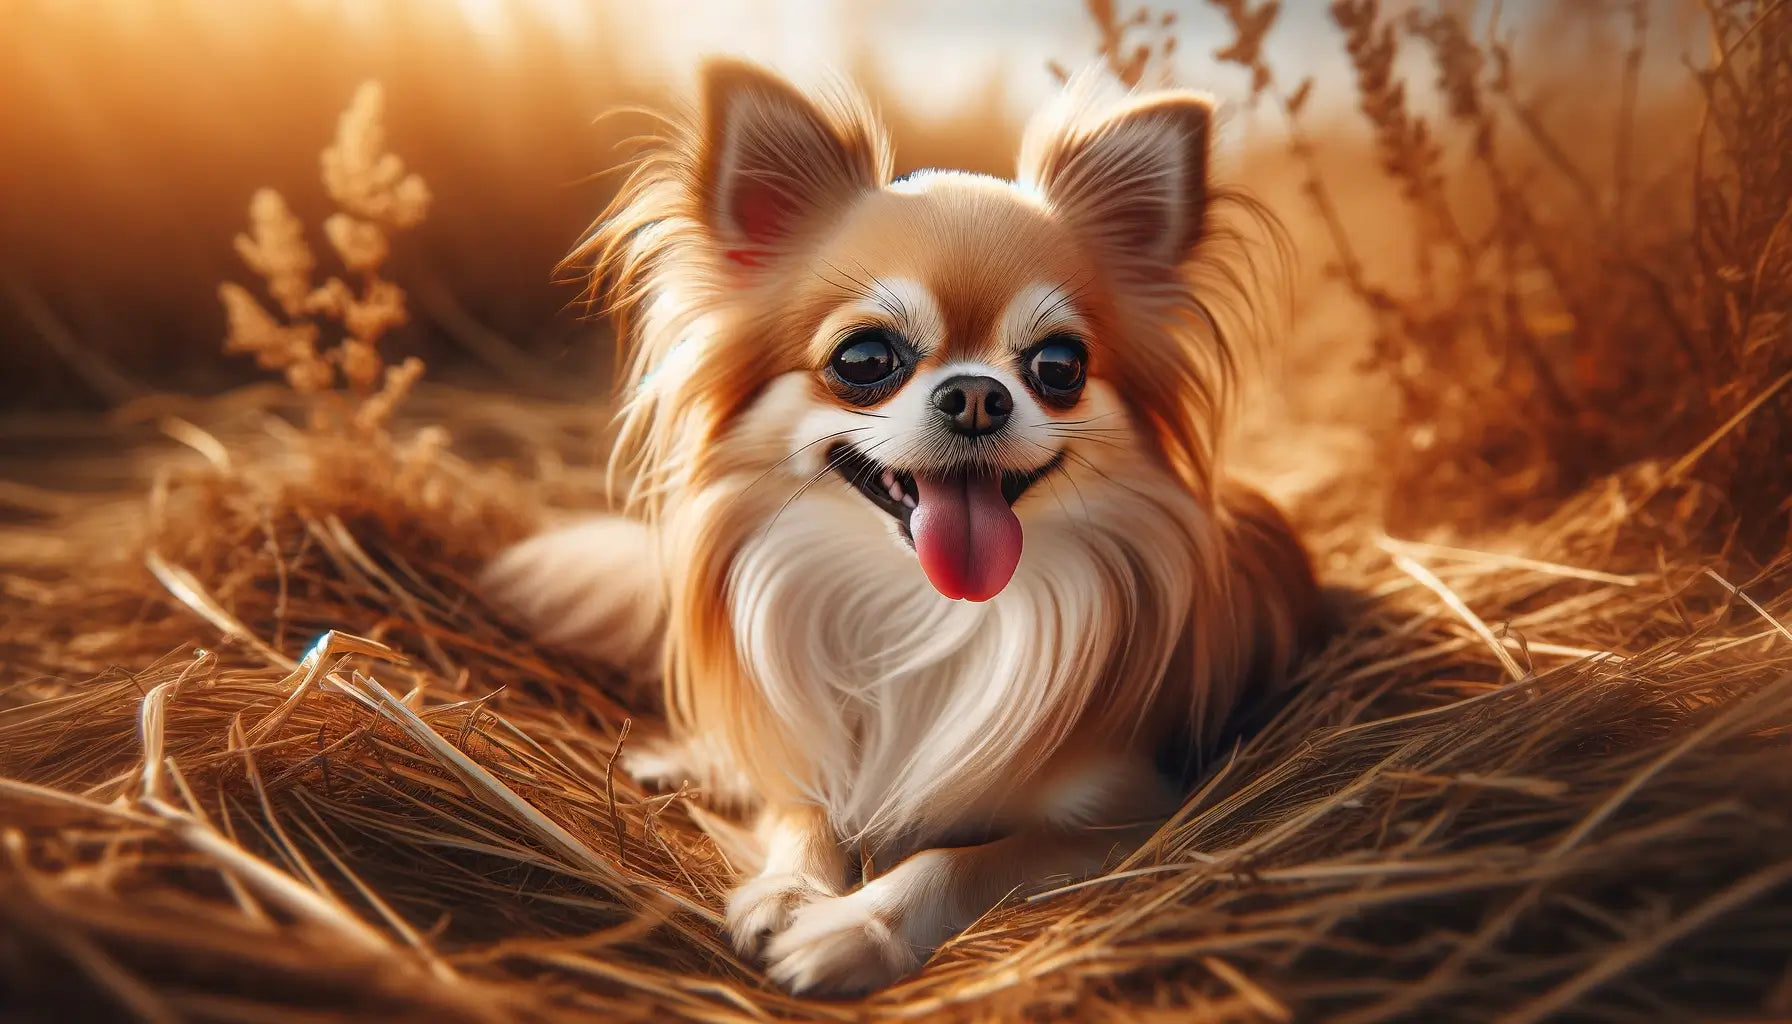 Long-Haired Chihuahua lying on a patch of dry grass, looking content and at ease.